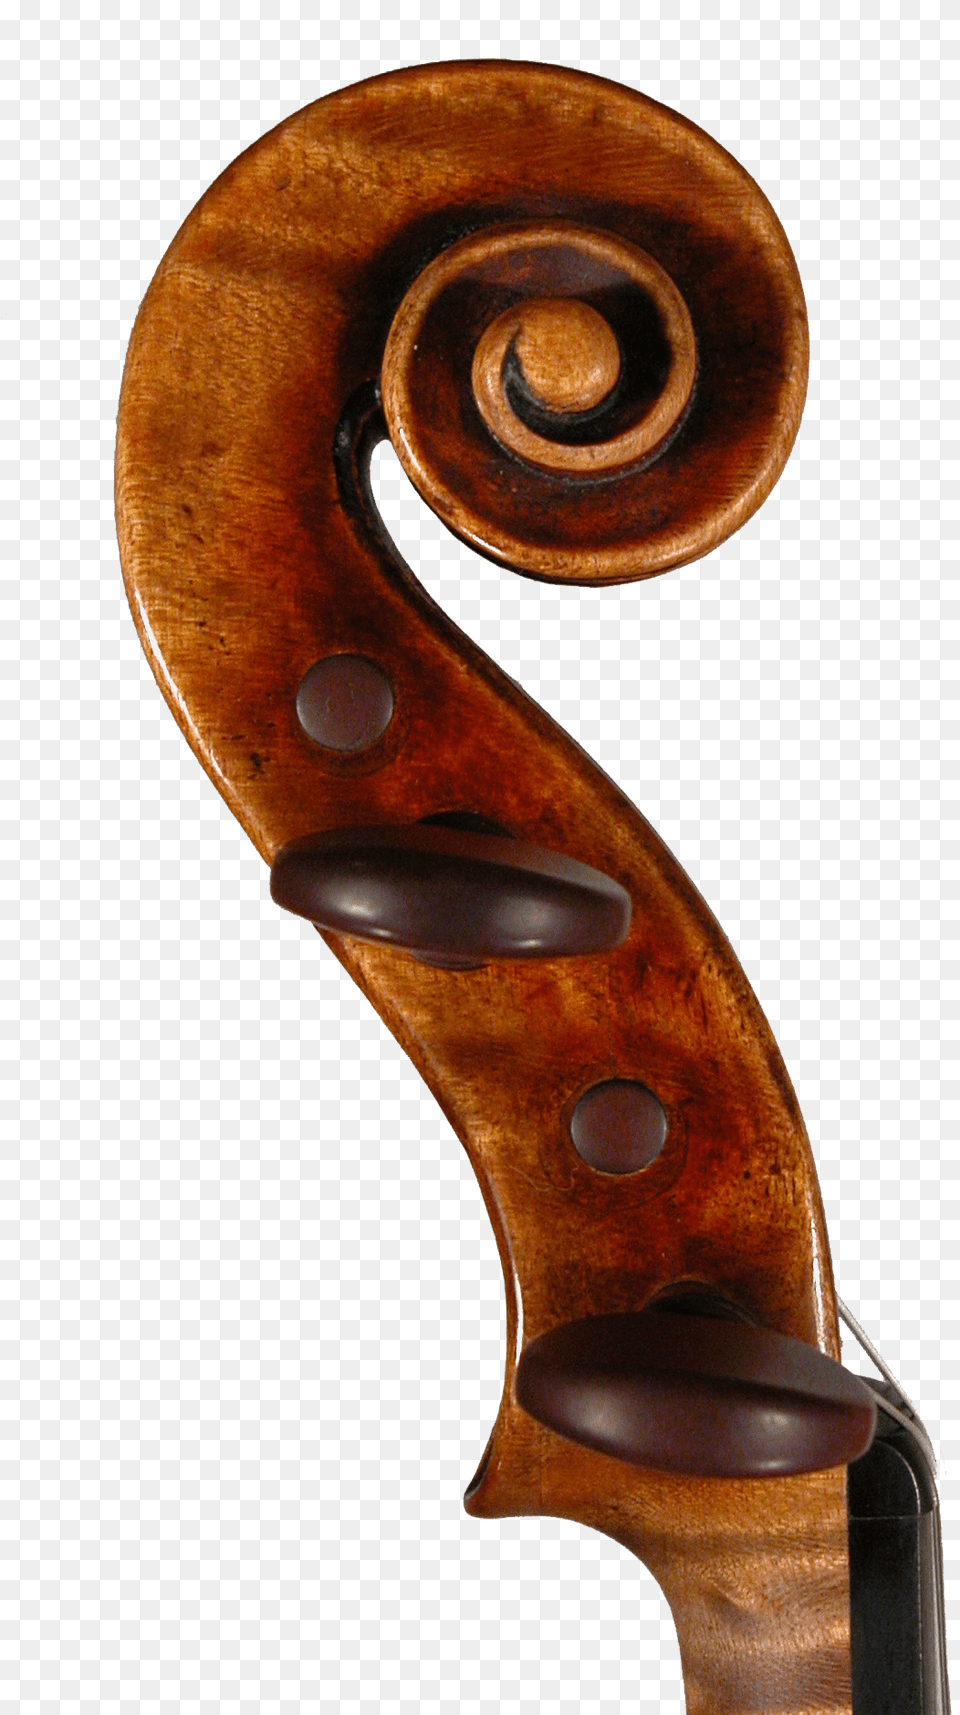 Violin Scroll, Cello, Musical Instrument Png Image